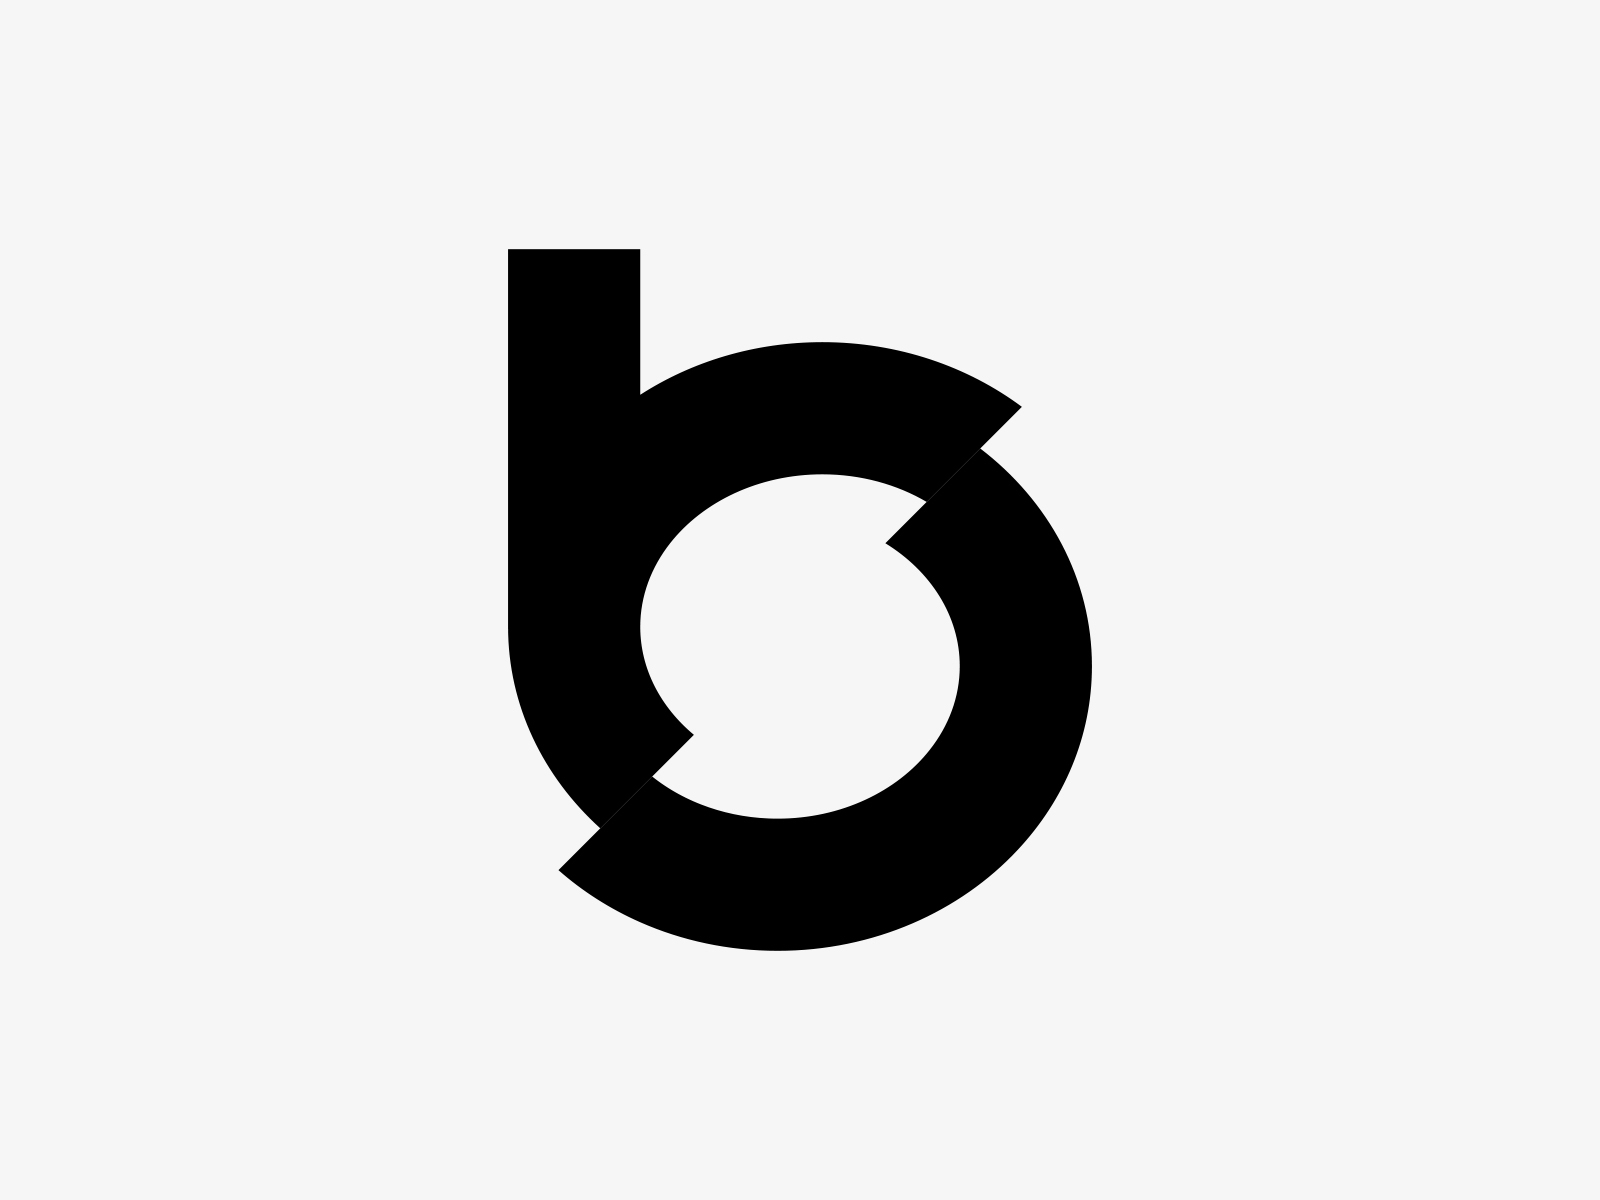 Letter bs by Md Rabiul Alam on Dribbble